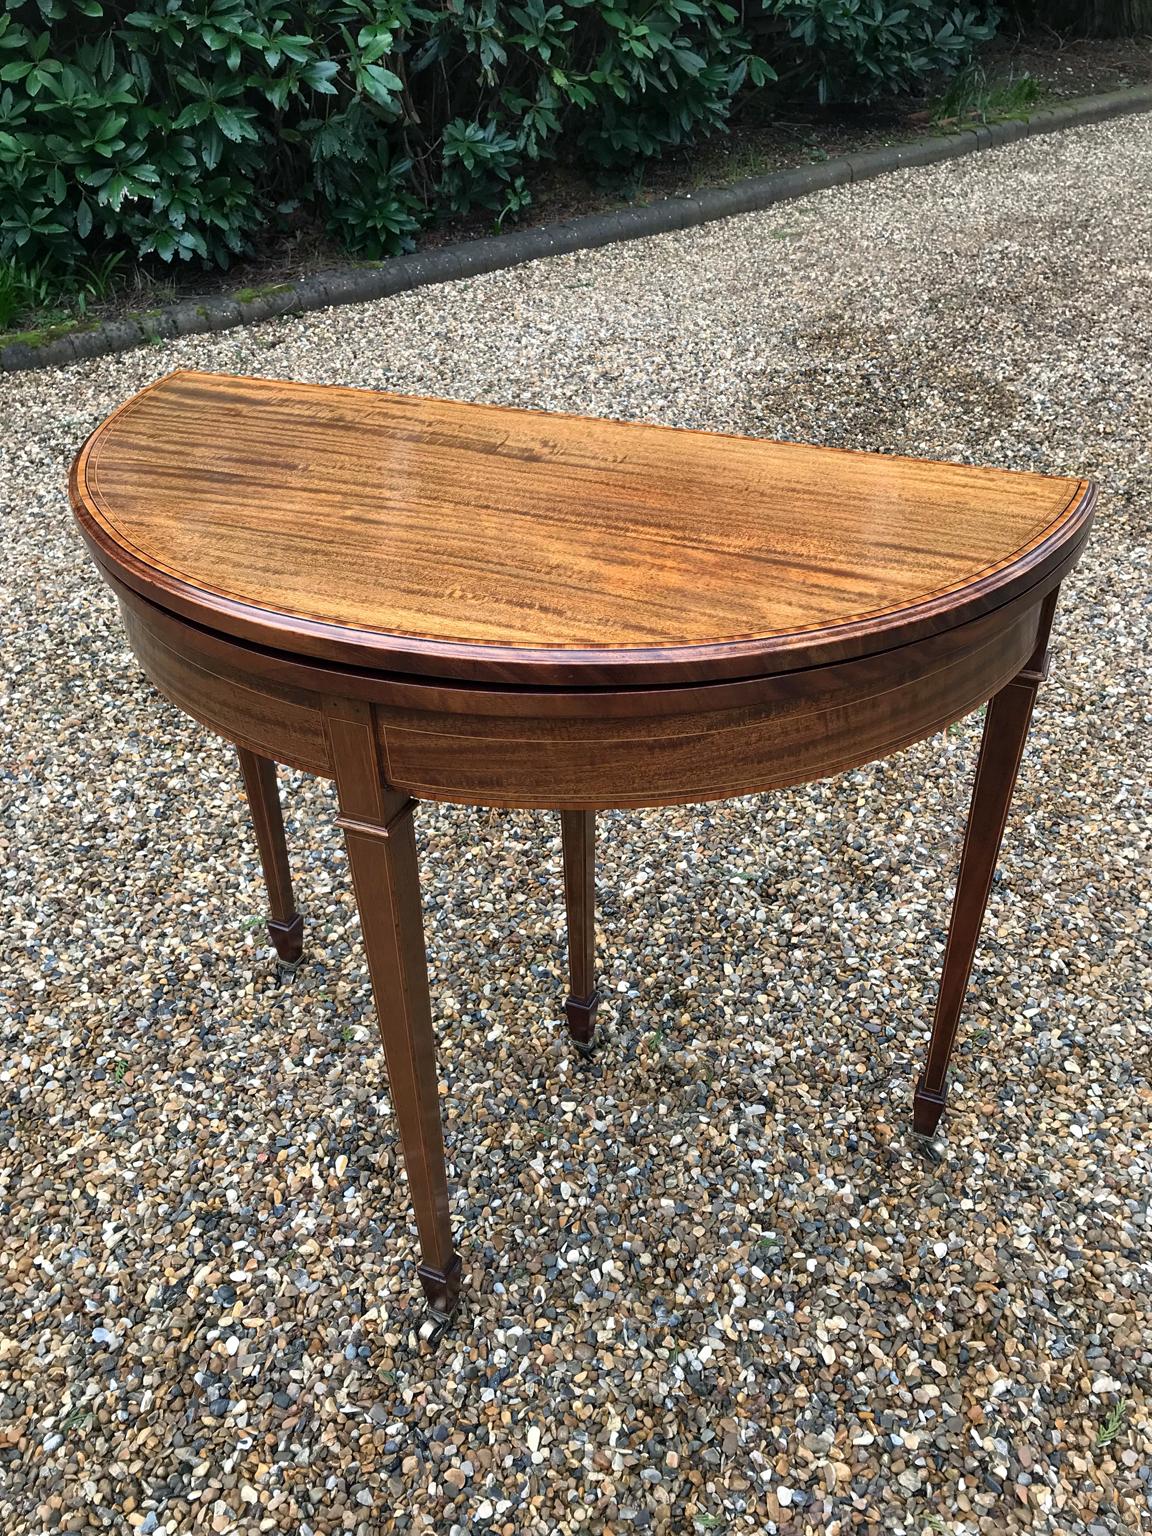 19th century late Victorian mahogany inlaid demilune card table with satinwood inlay on square tapering legs. With newly fitted baize.

circa 1890-1901

Dimensions:
Height: 29.5 inches - 76 cms
Width: 33 inches - 83 cms
Depth: 16 inches - 41